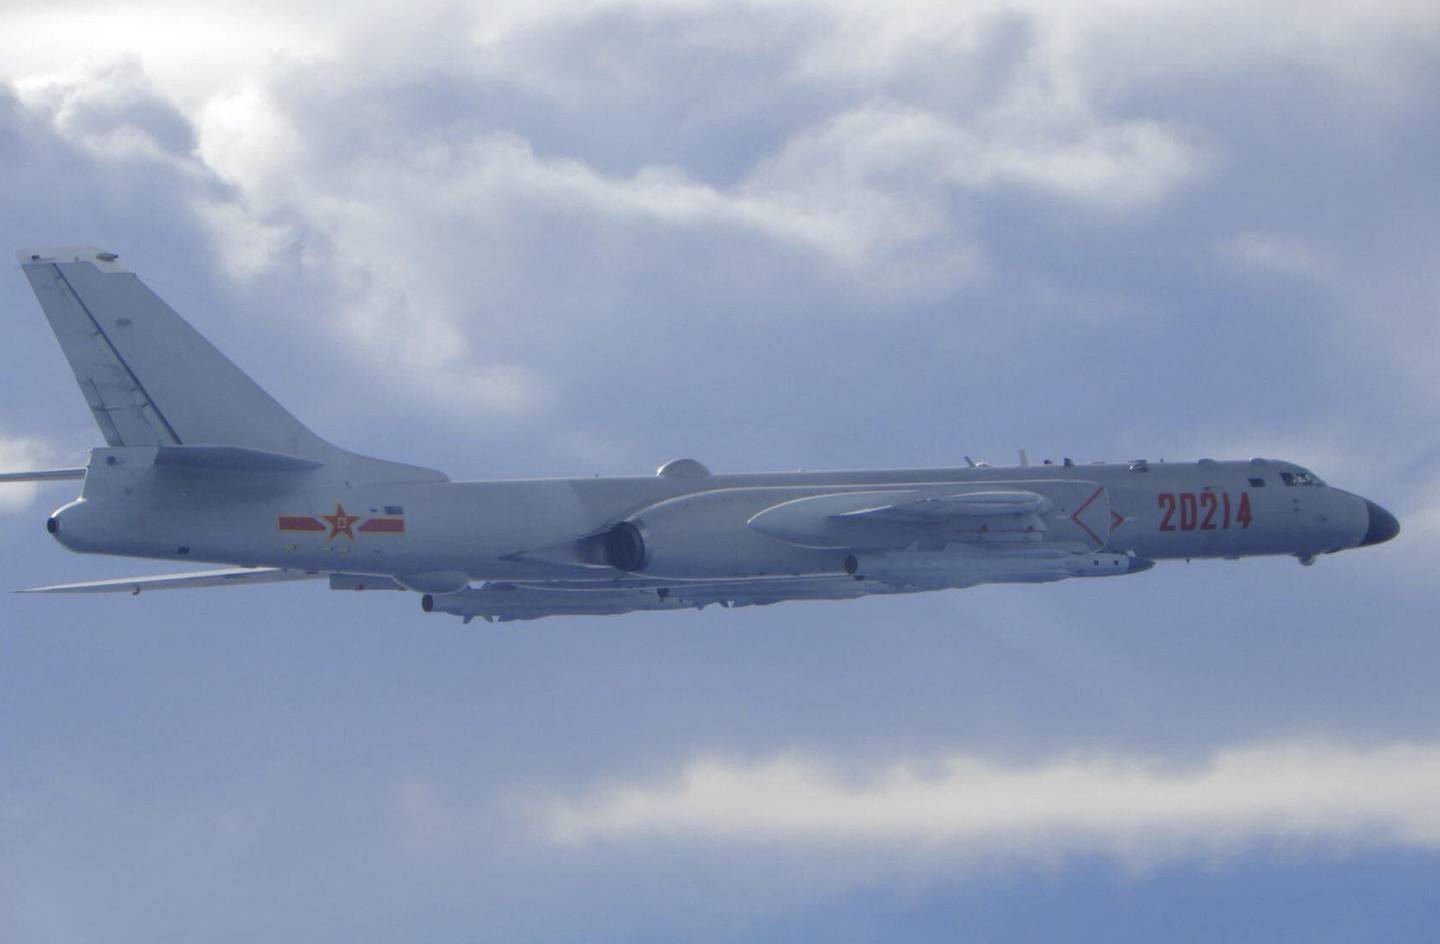 In this photo released by the Taiwan Ministry of National Defense, a Chinese People's Liberation Army H-6 bomber is seen flying near the Taiwan air defense identification zone, ADIZ, near Taiwan on Friday, Sept. 18, 2020.